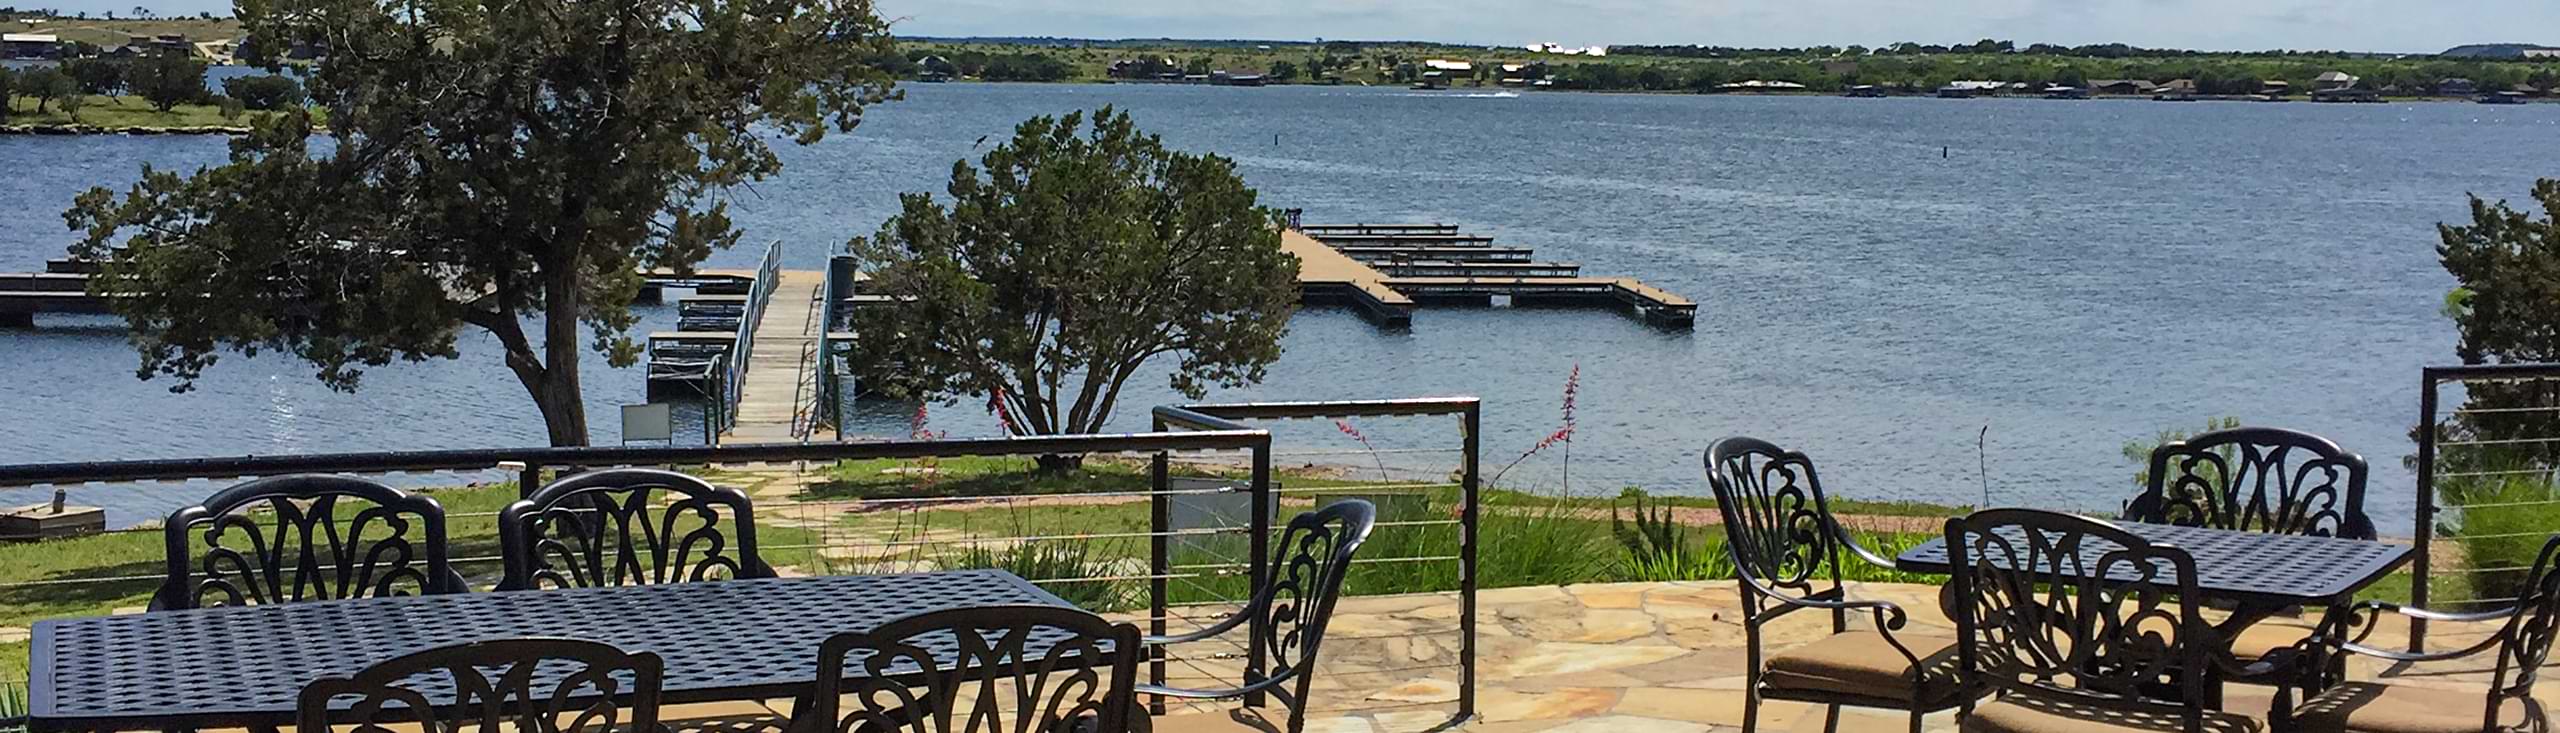 View property for sale at The Harbor on Possum Kingdom Lake